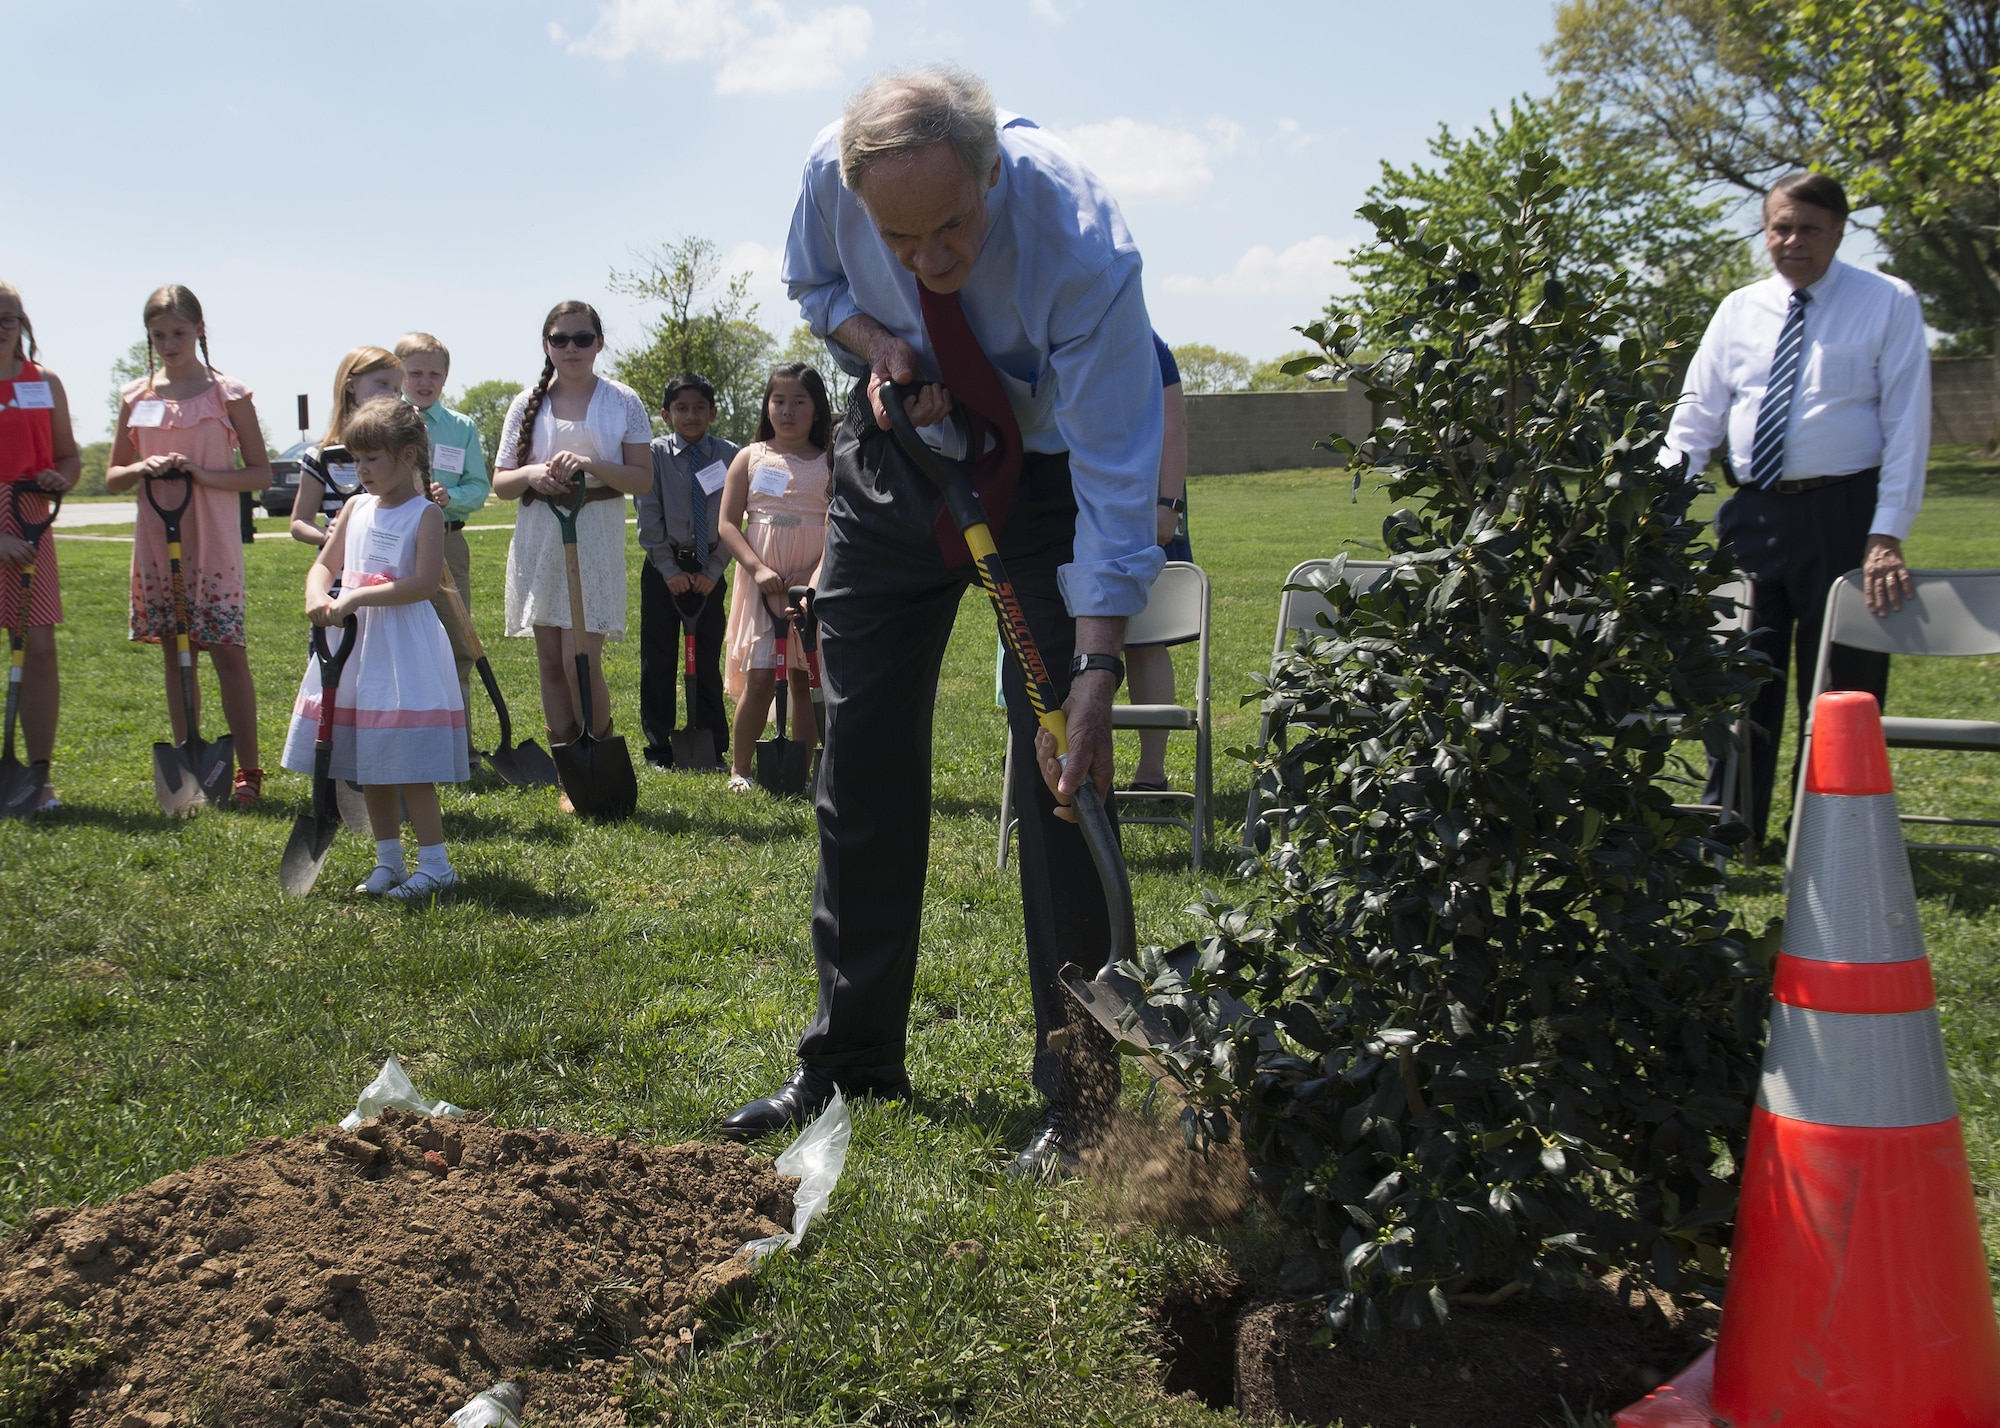 Sen. Tom Carper, Del., shovels dirt to plant a tree at the State of Delaware Arbor Day event April 28, 2017, at Dover Air Force Base, Del. The tree is an American Holly, the official state tree of Delaware. (U.S. Air Force photo by Senior Airman Zachary Cacicia)